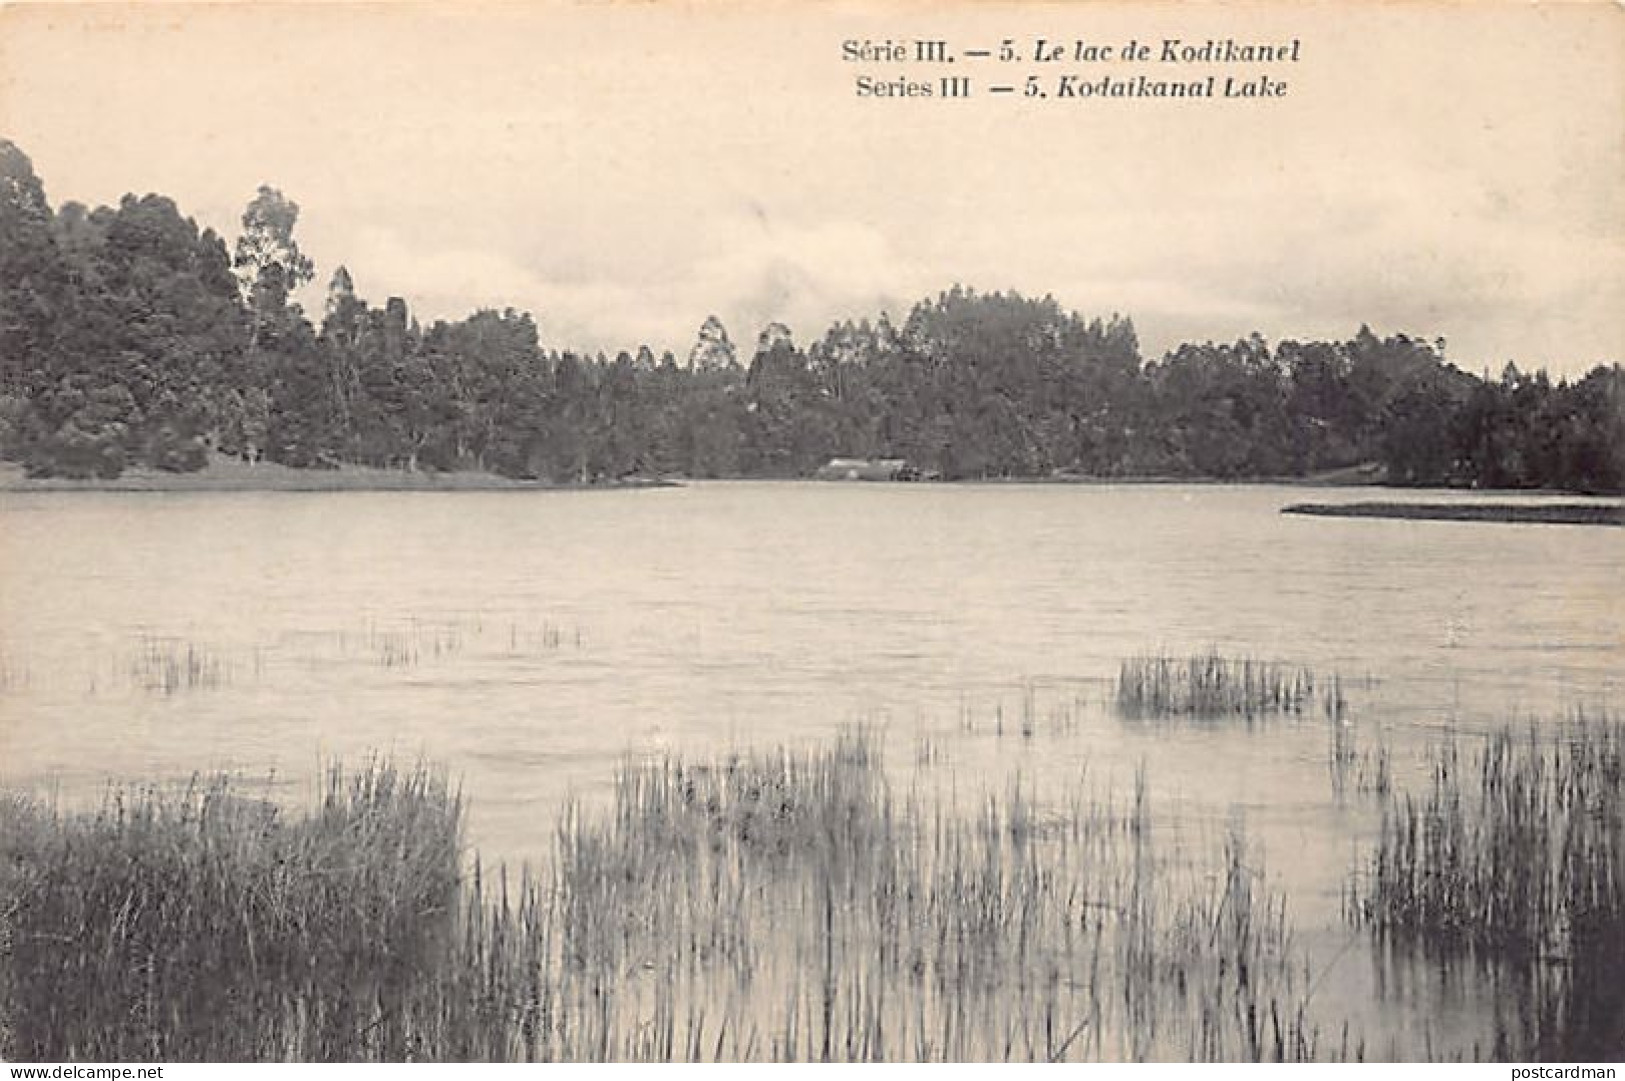 India - KODAIKANAL Tamil Nadu - The Lake - Publ. Works From Industrial Schools Of South India - Indien